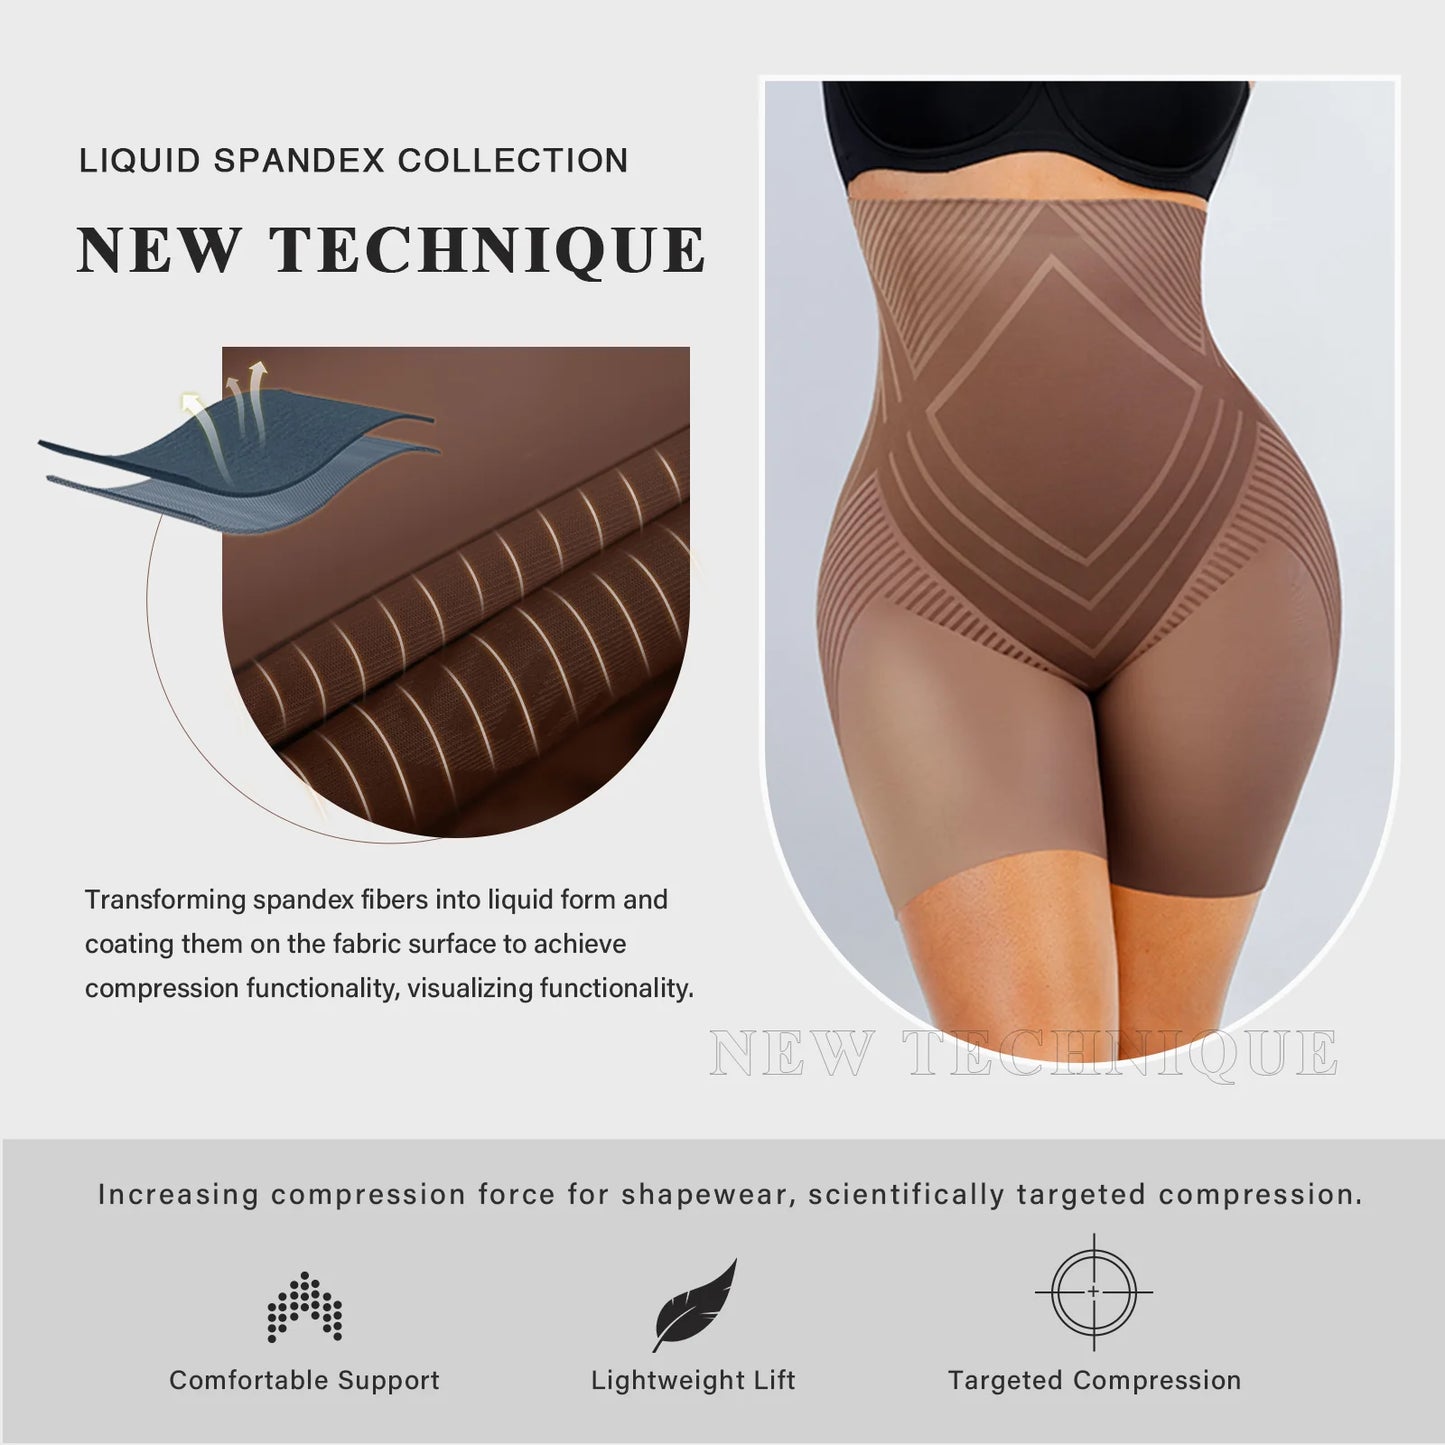 High Waisted Thigh Slimmer and Waist Trimming with New Liquid Spandex Technology